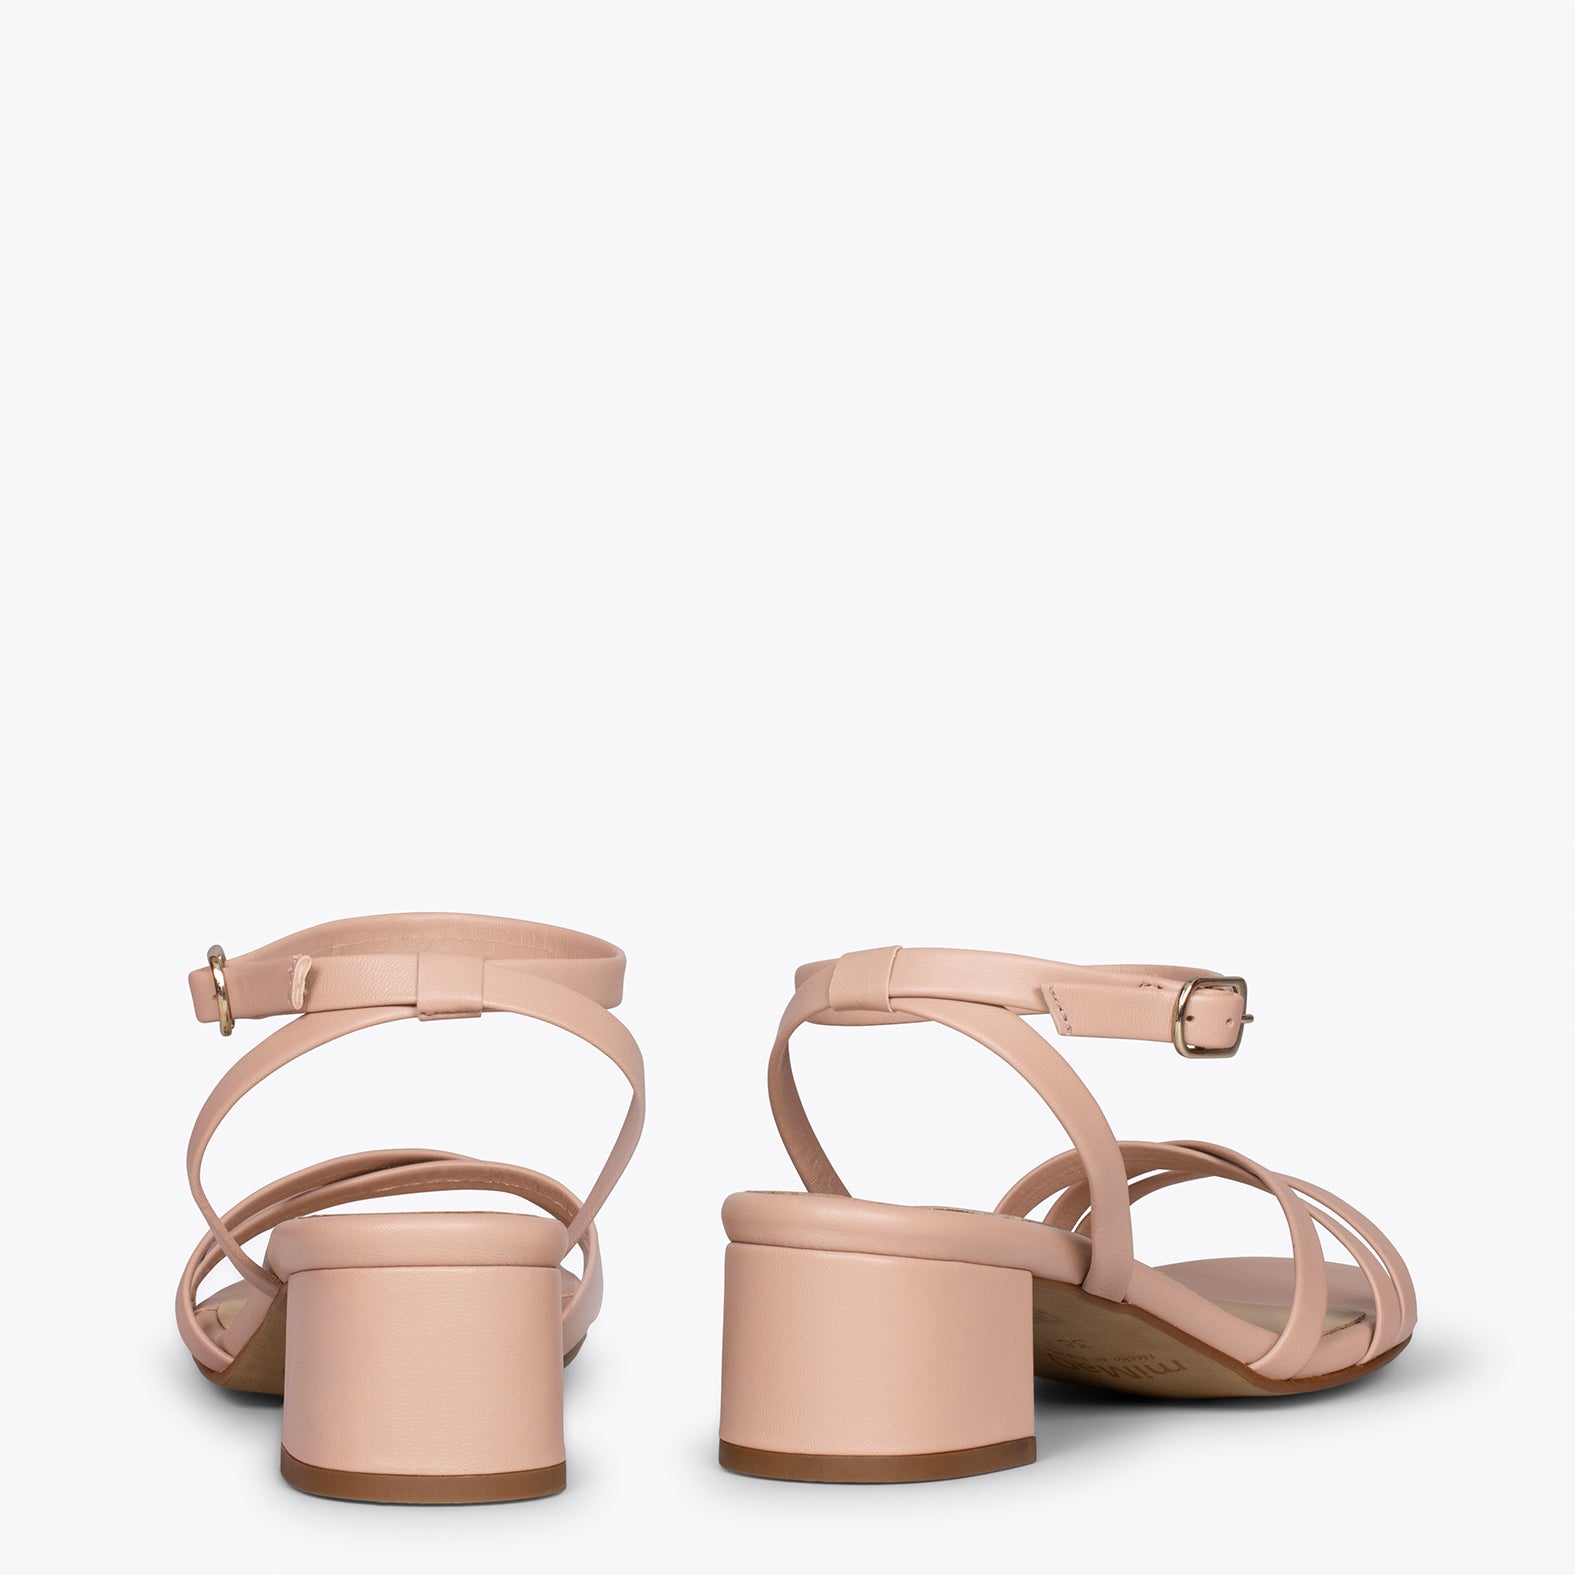 VIENA – NUDE sandals with straps